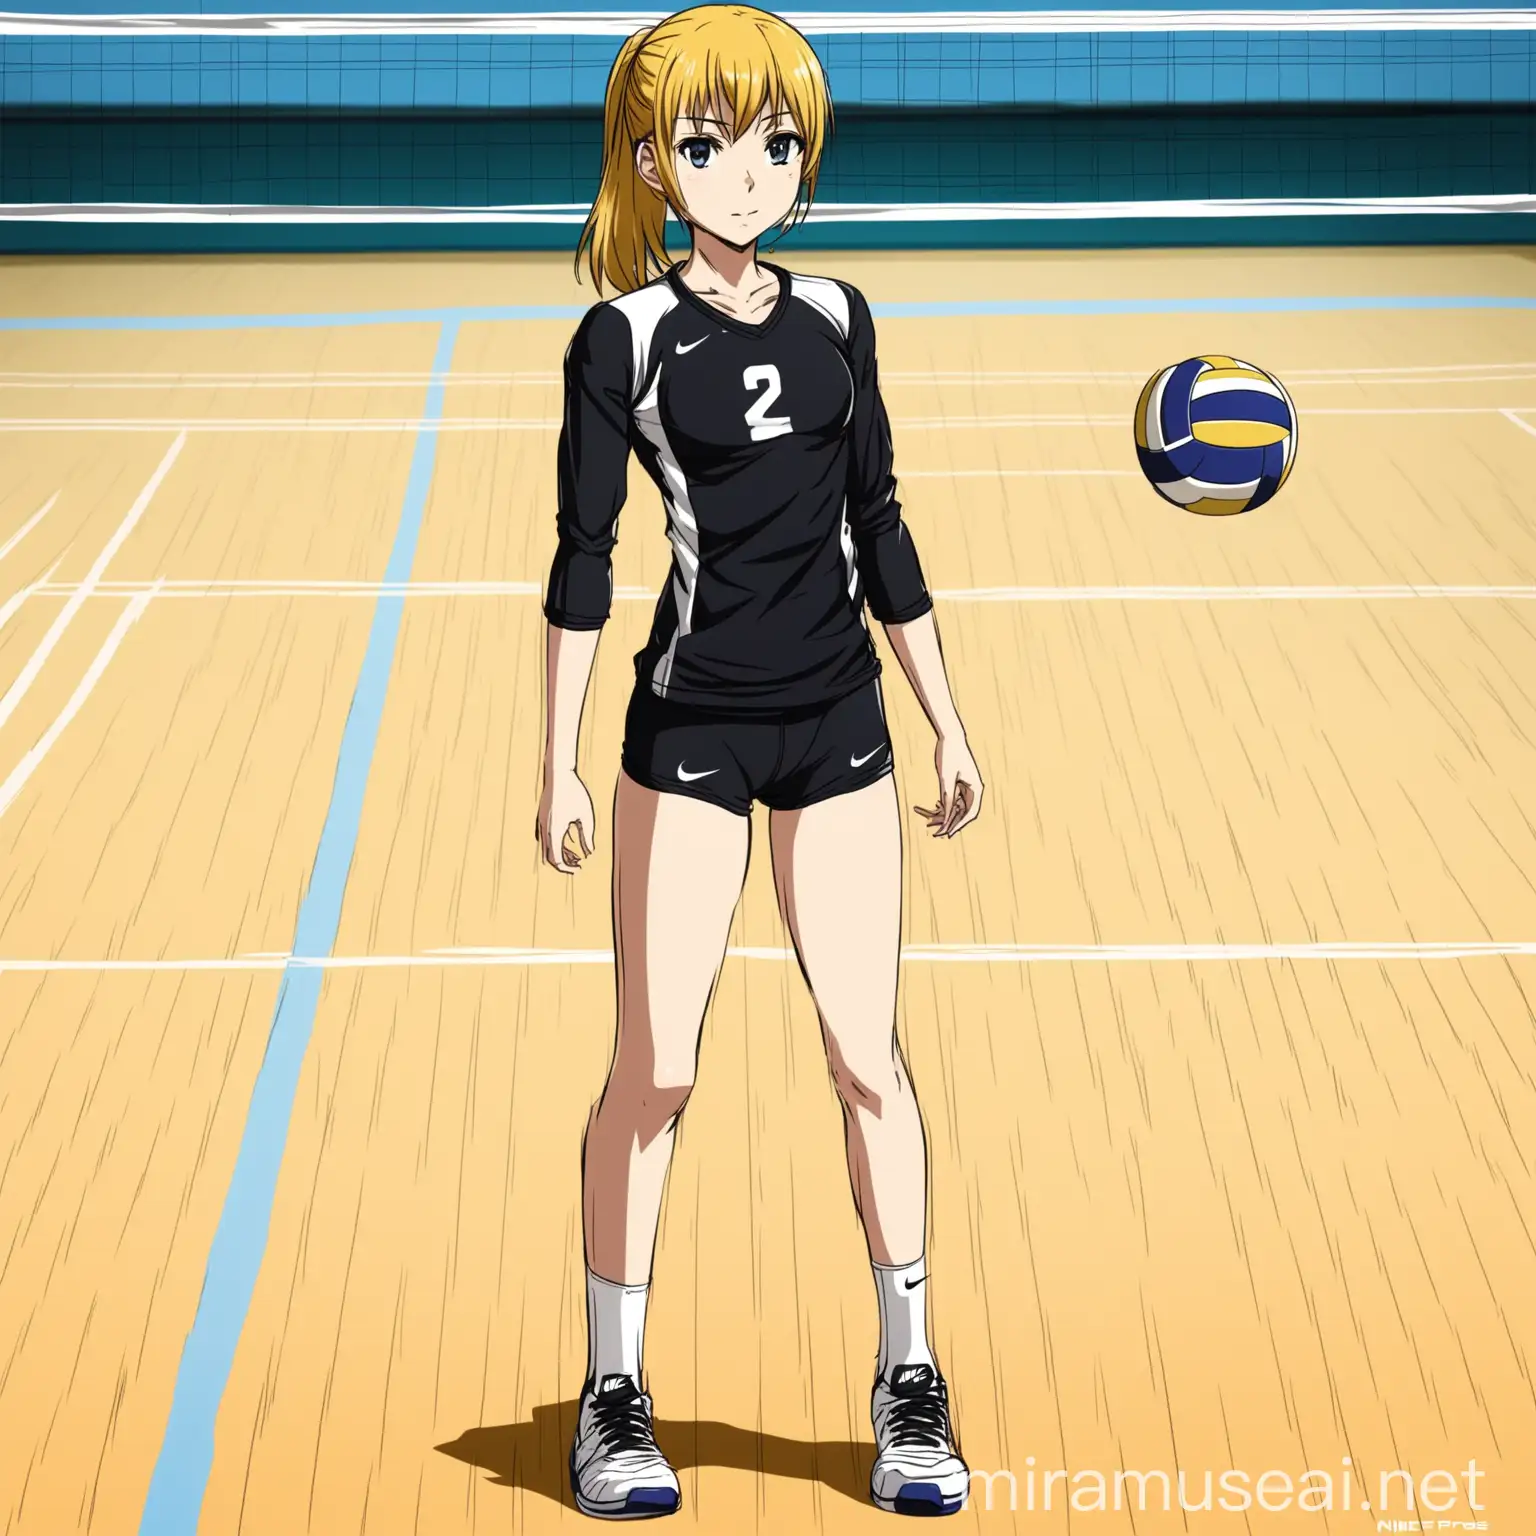 Fullbody,highschool girl,girl, petite, volleyball clothes, volleyball court, nike pros,anime